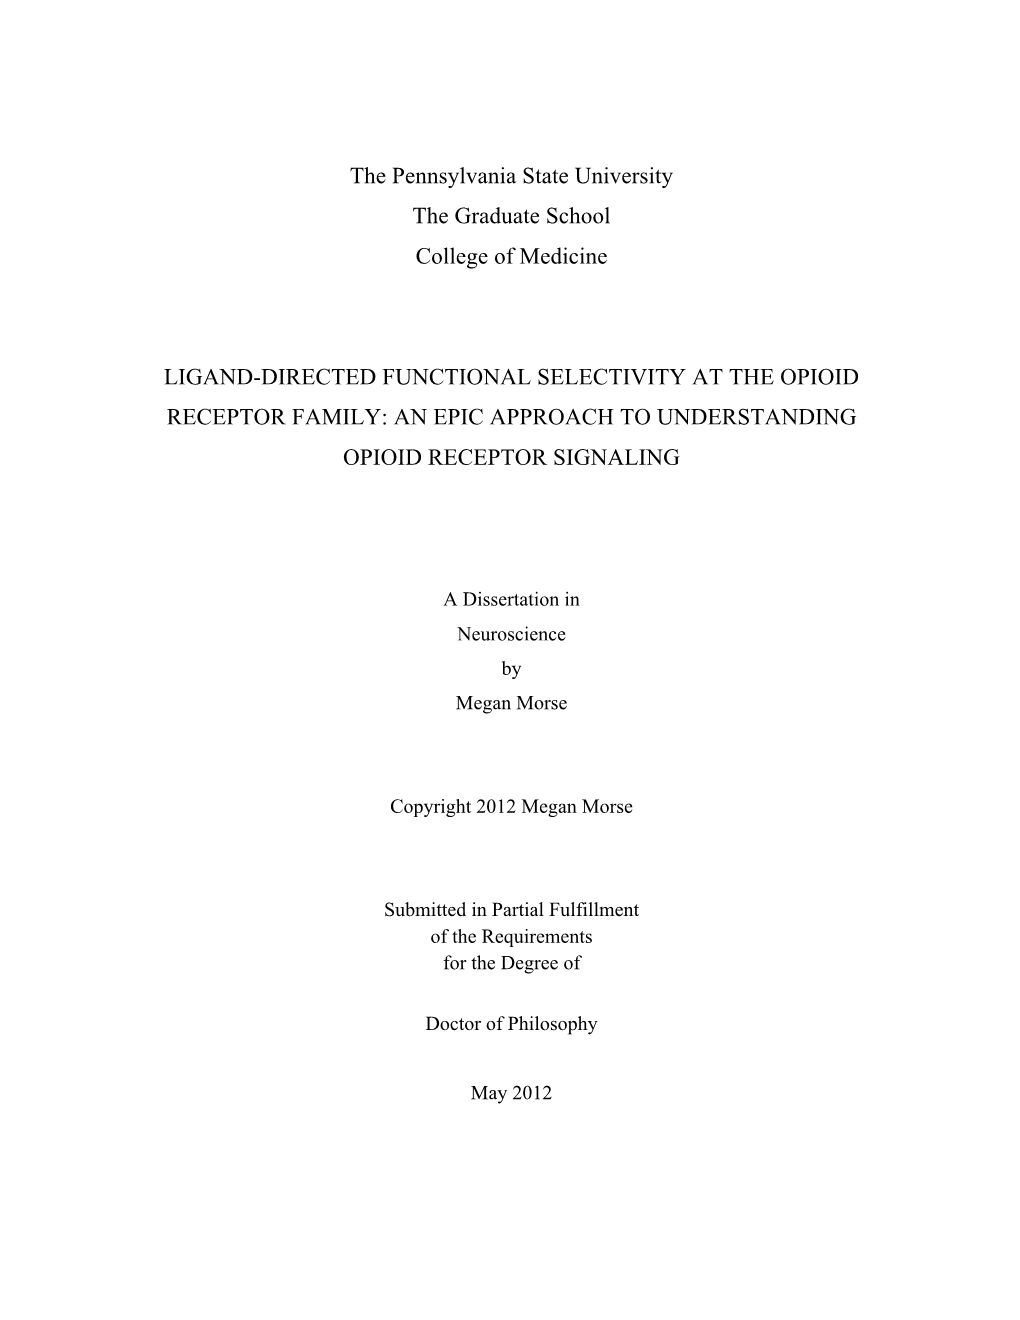 2012-01-Thesis Final